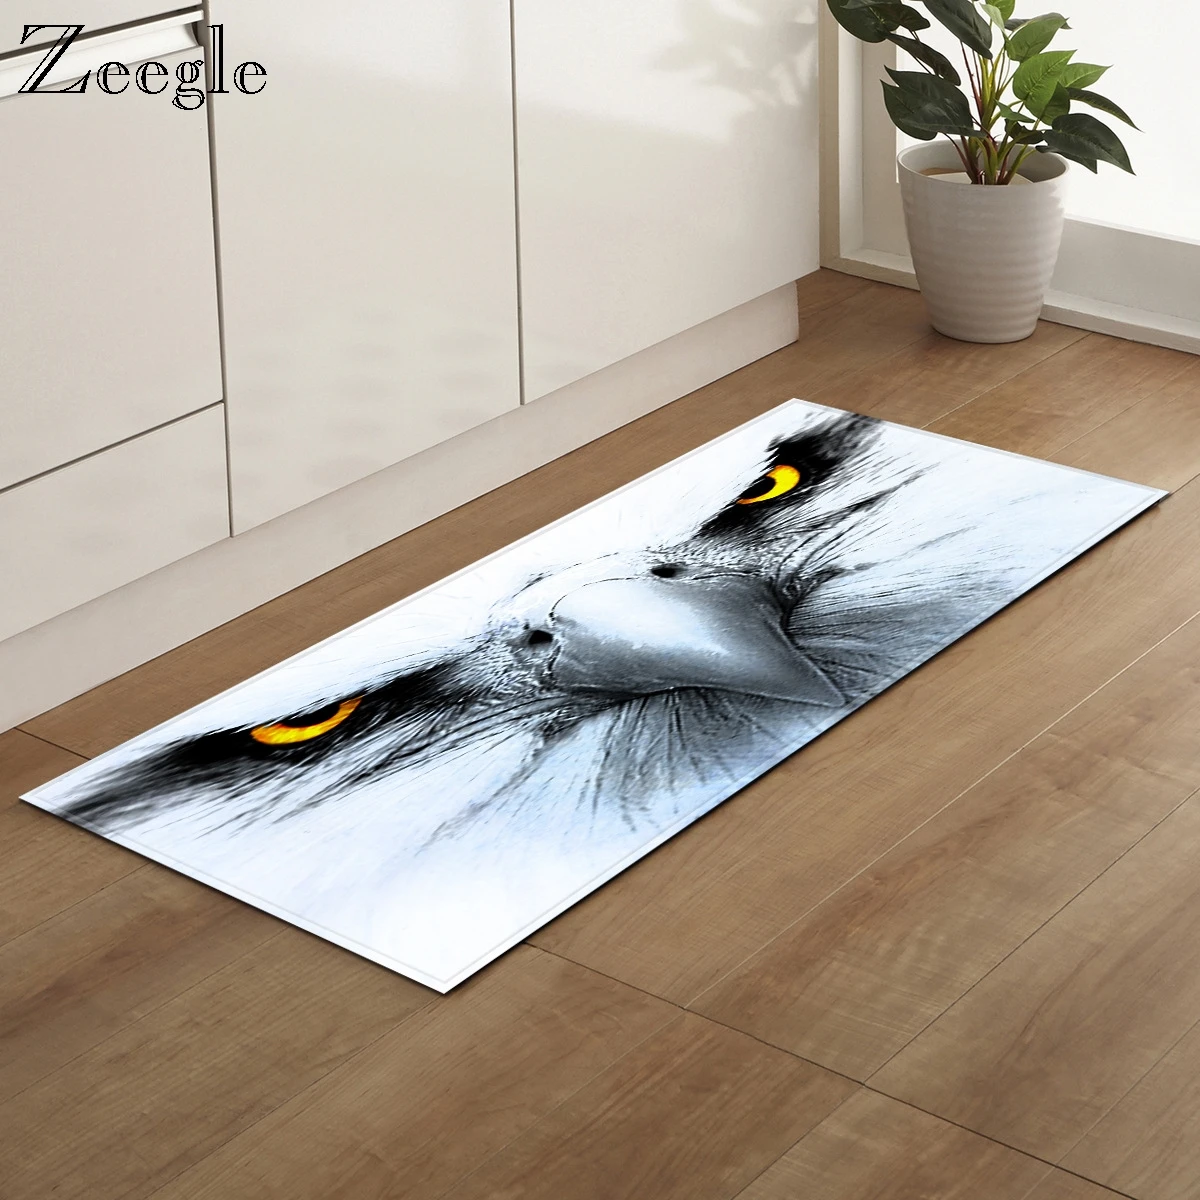 

Eagle Printed Flannel Rectangle Long Kitchen Mat Soft Flannel Anti Skid Doormat Home Decor Entrance Floor Mat Hallway Area Rugs